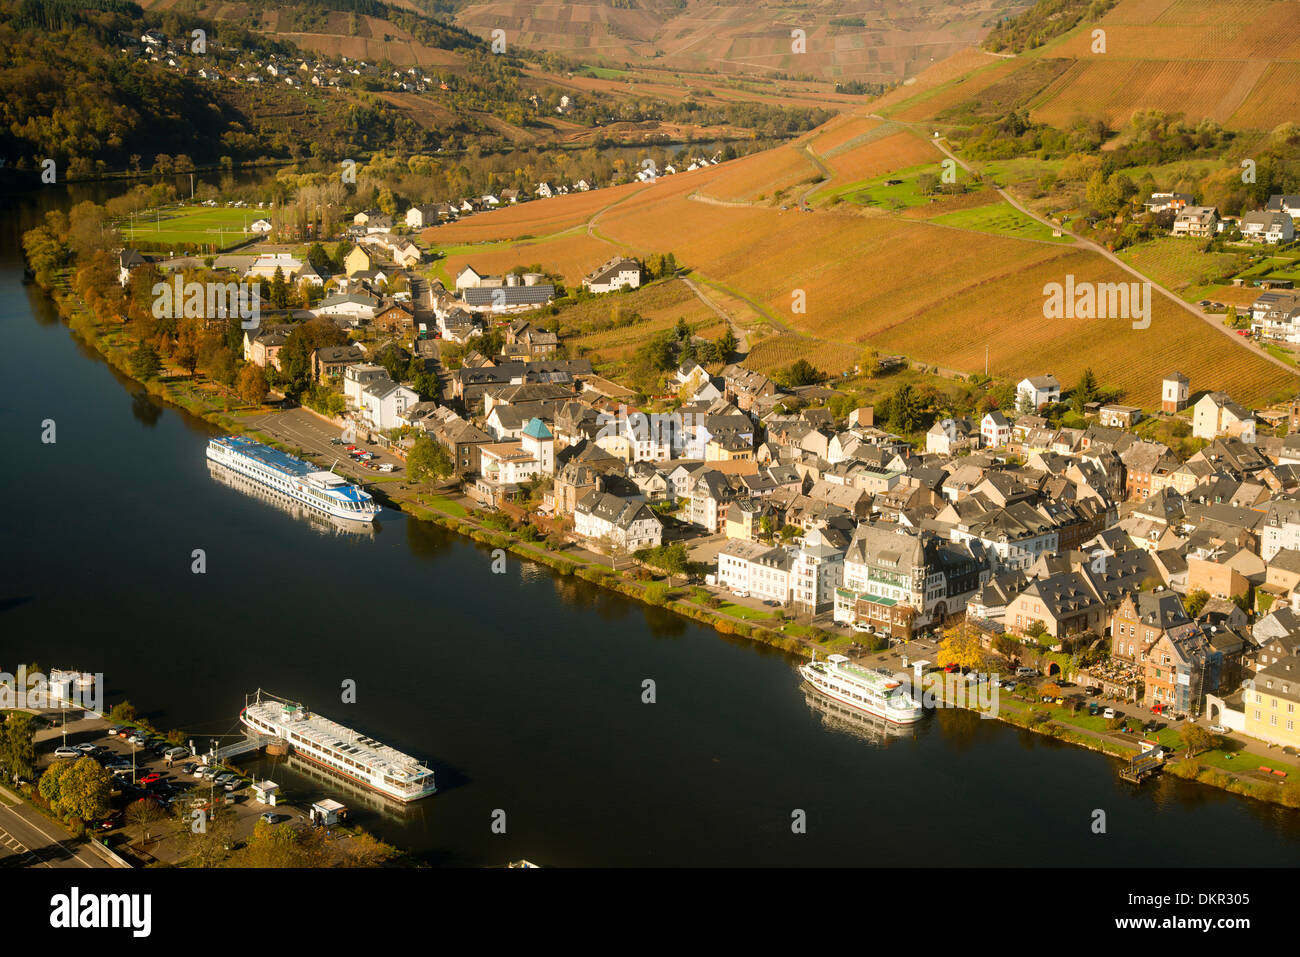 Holiday boats holiday ships Bernkastel boat excursion boat trip Germany Europe river flow tourism water circle ring Moselle Stock Photo